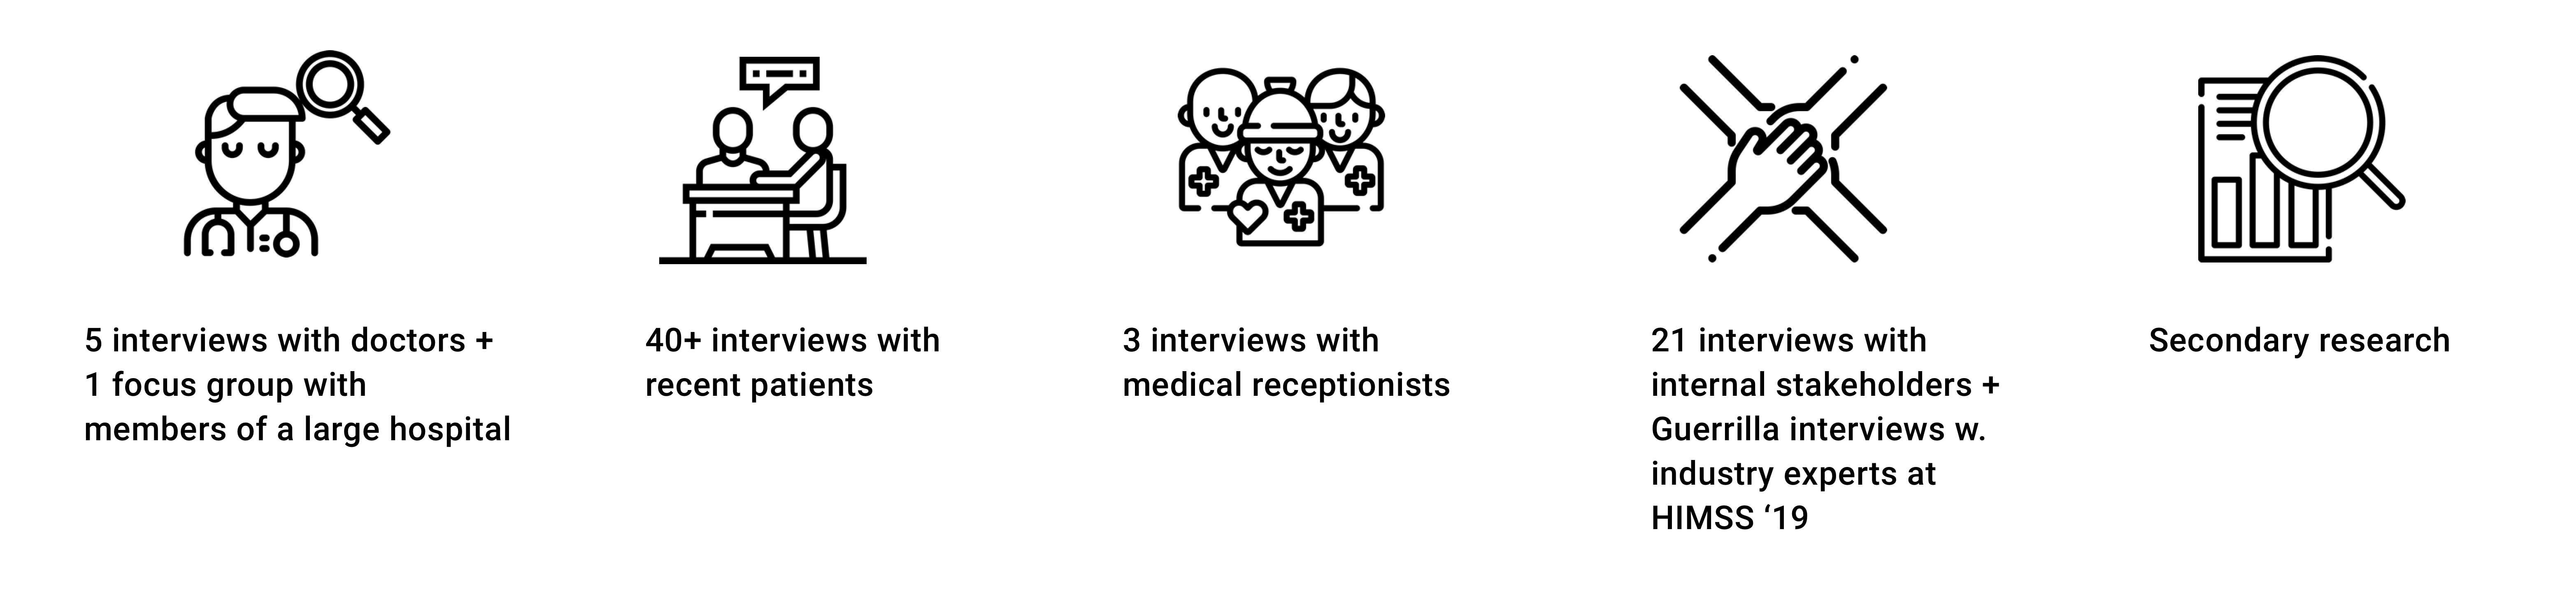 image illustrating all the different research methods I used to understand the patient's journey when they fall sick which are 5 interviews with doctors, 1 focus group with members of a large hospital, 40+ interviews with recent patients, 3 interviews with medical receptionists, 21 interviews with internal stakeholders, guerilla interviews with industry experts at HIMSS conference 2019 and secondary research